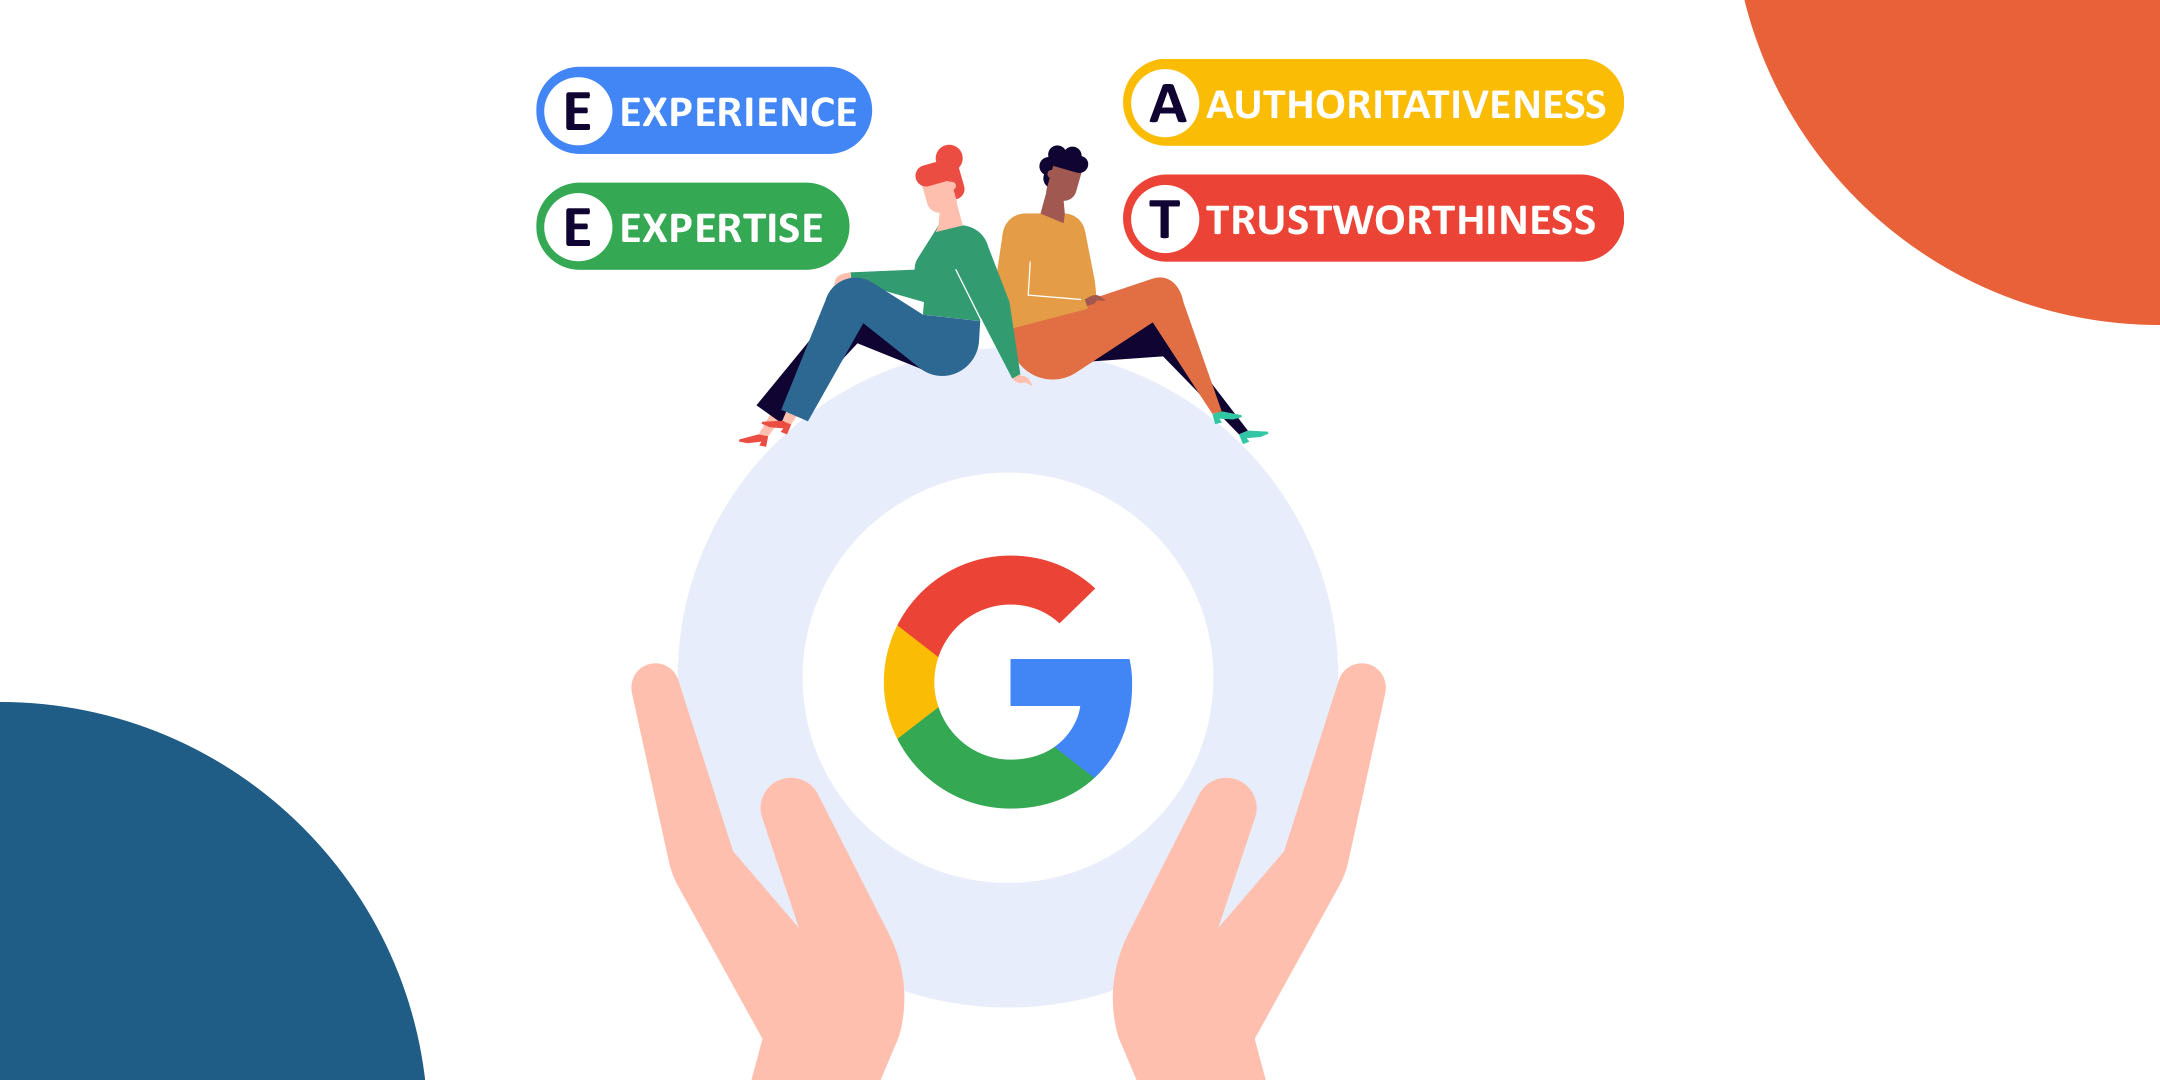 Two people sit next to a Google icon. The following words are written next to them 'Experience', 'Expertise', 'Authoritativeness' and 'Trustworthiness'.